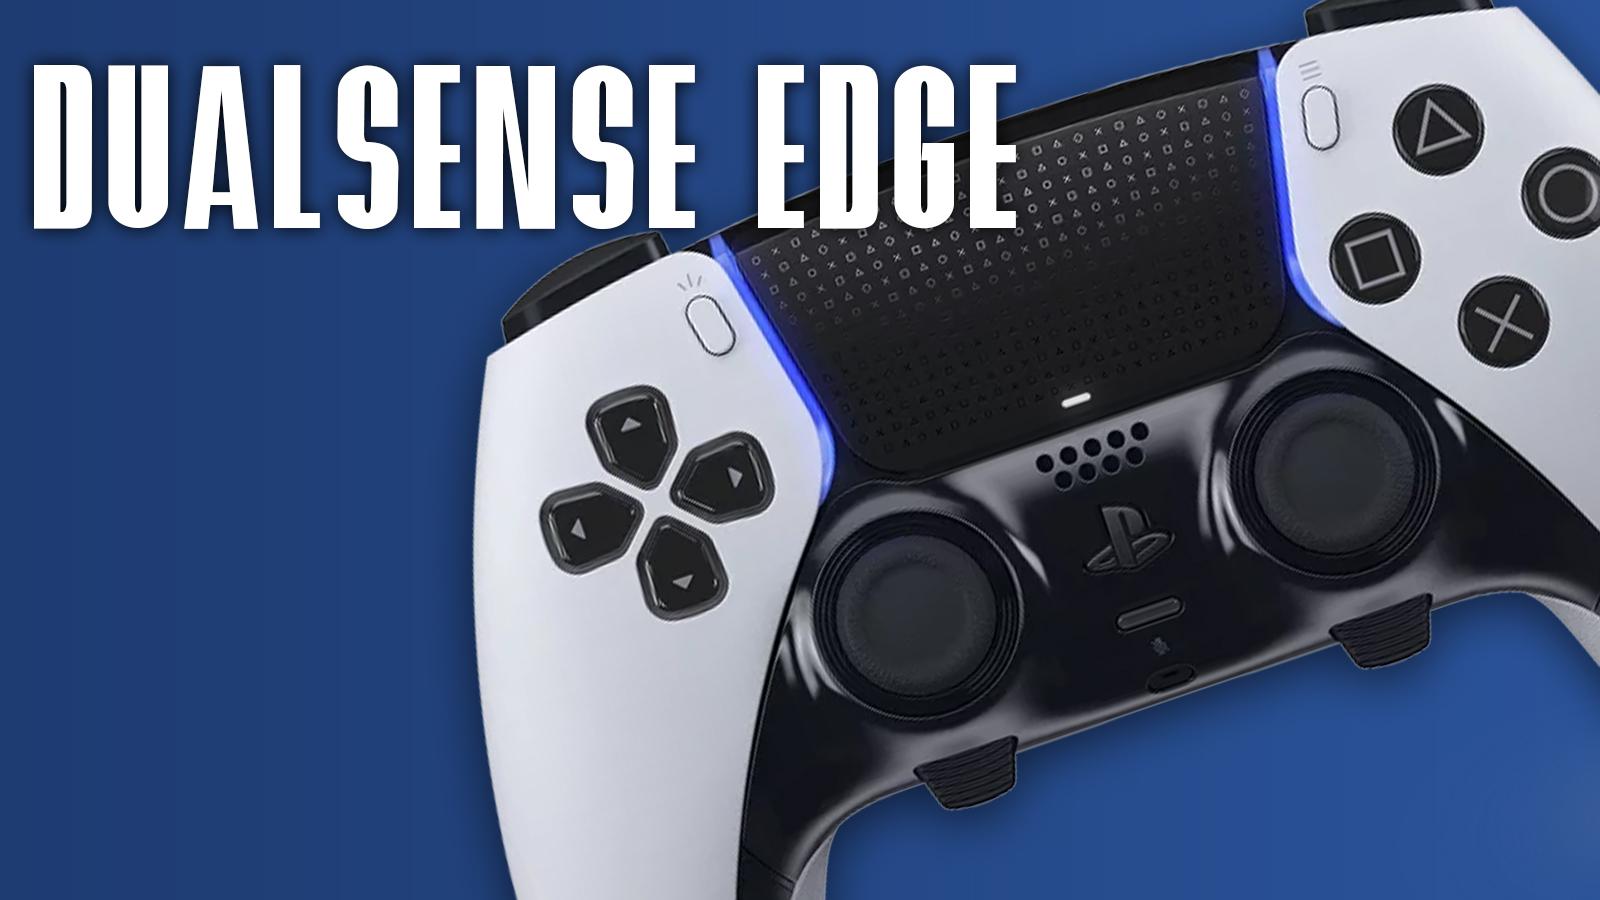 The PlayStation 5 DualSense Edge Controller Releases This January